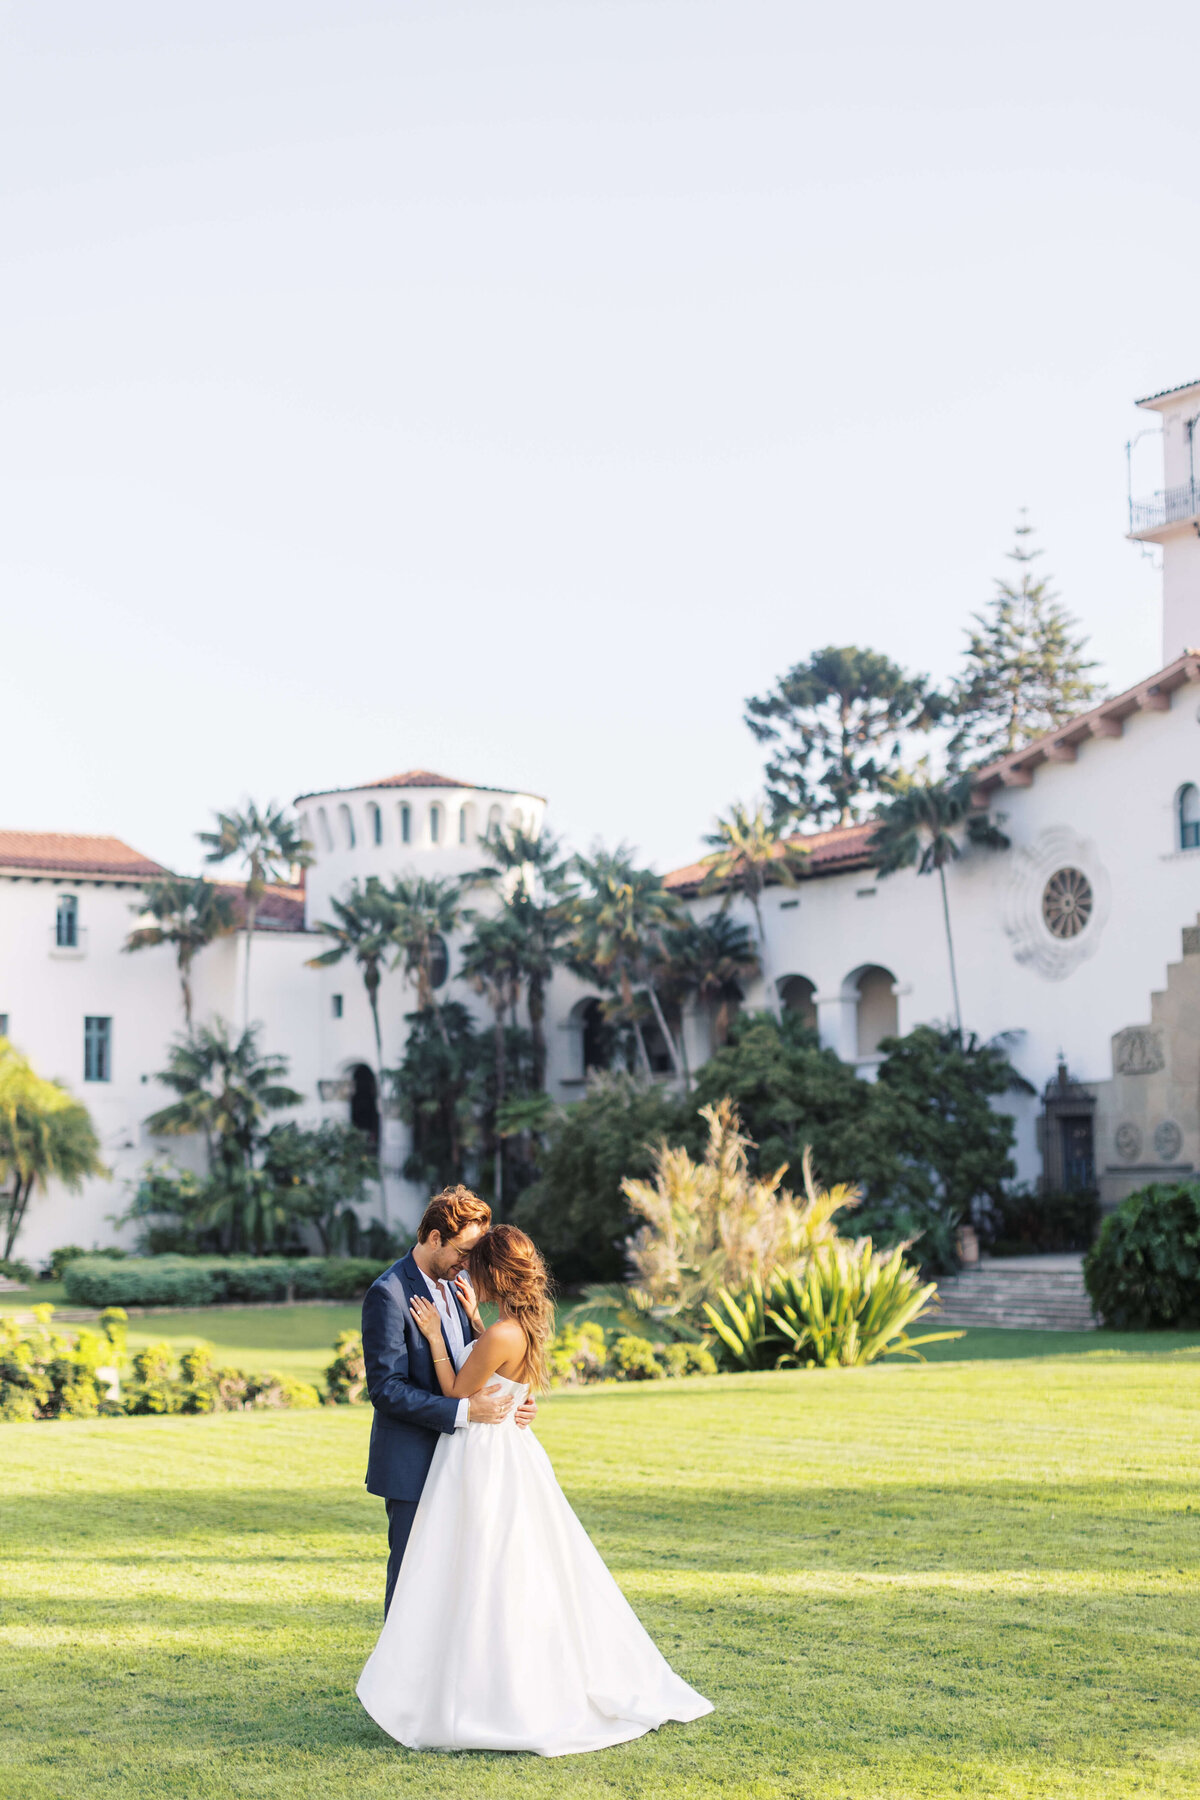 Husband and wife embrace each other in the field in front of Santa Barbara courthouse.